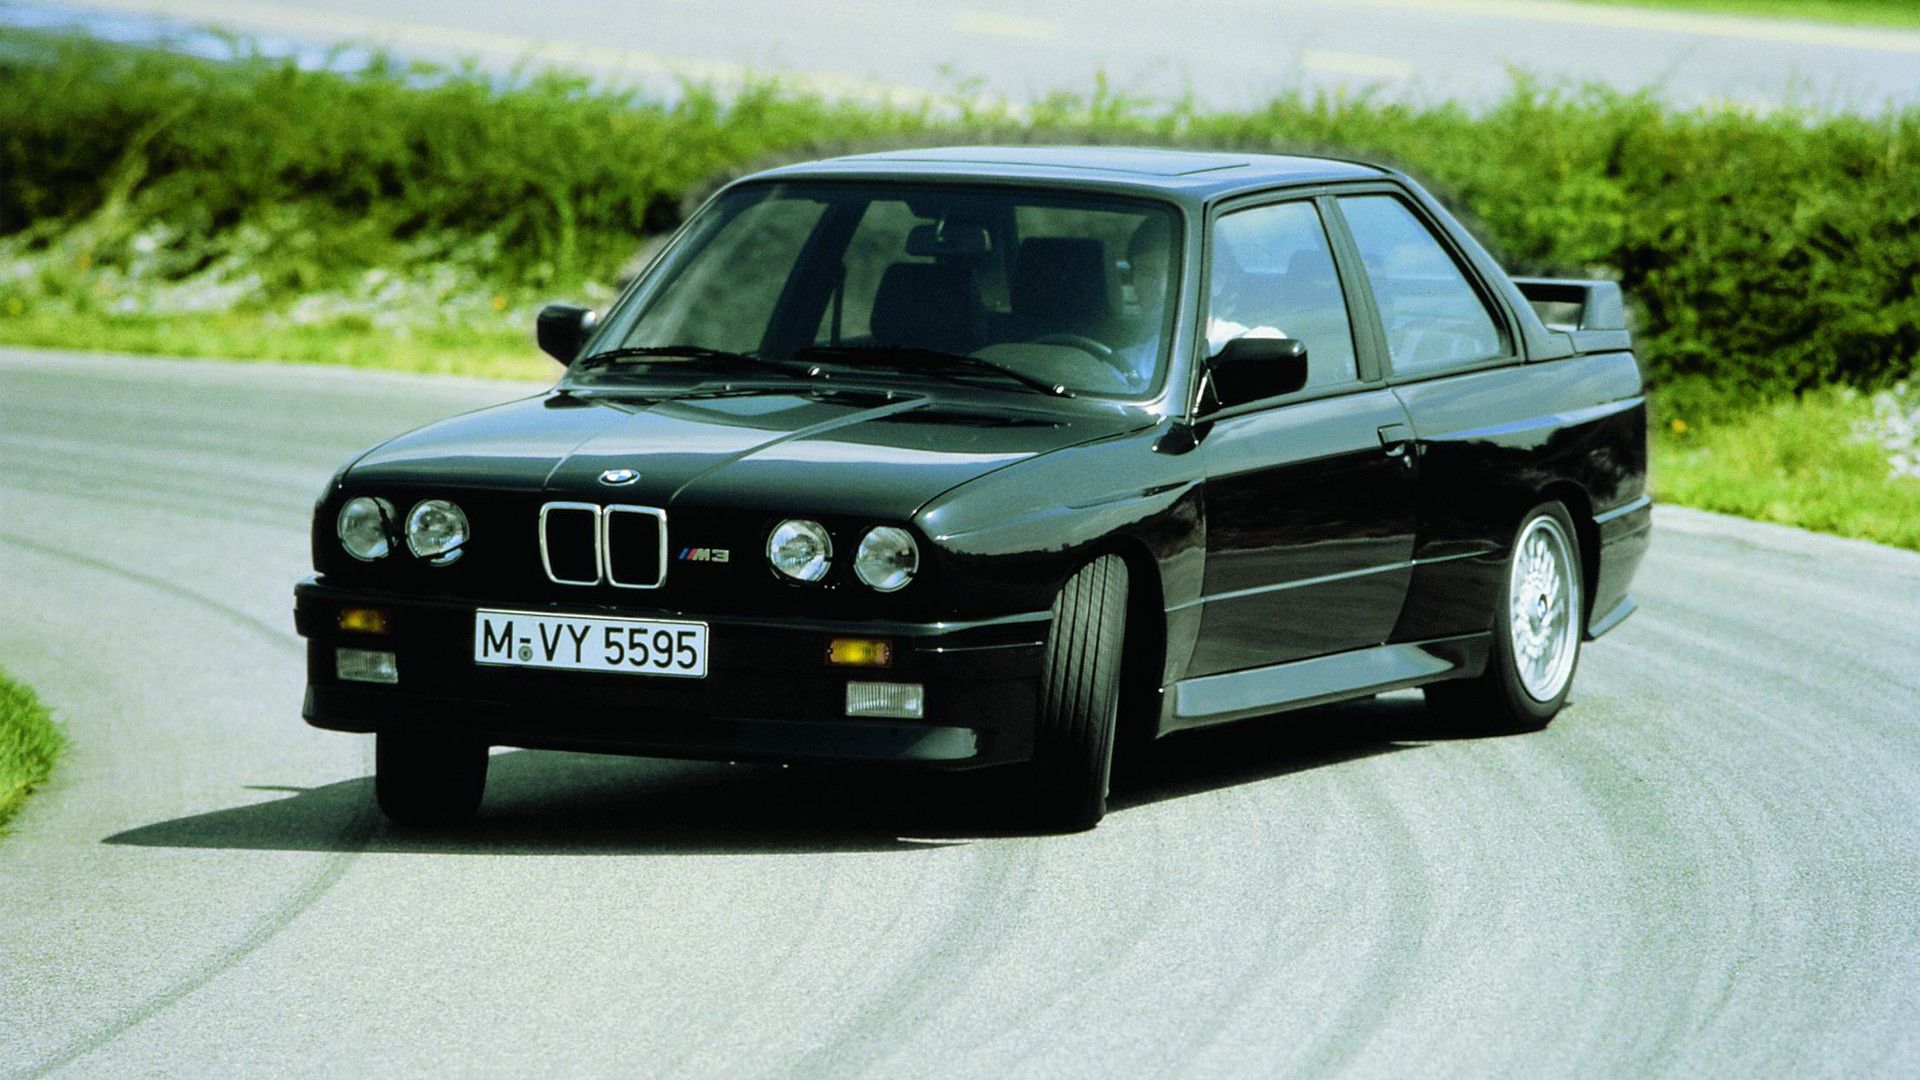 BMW M3 (E30) - 1986: The first time a four-cylinder engine was used in a production car by BMW. - BMW